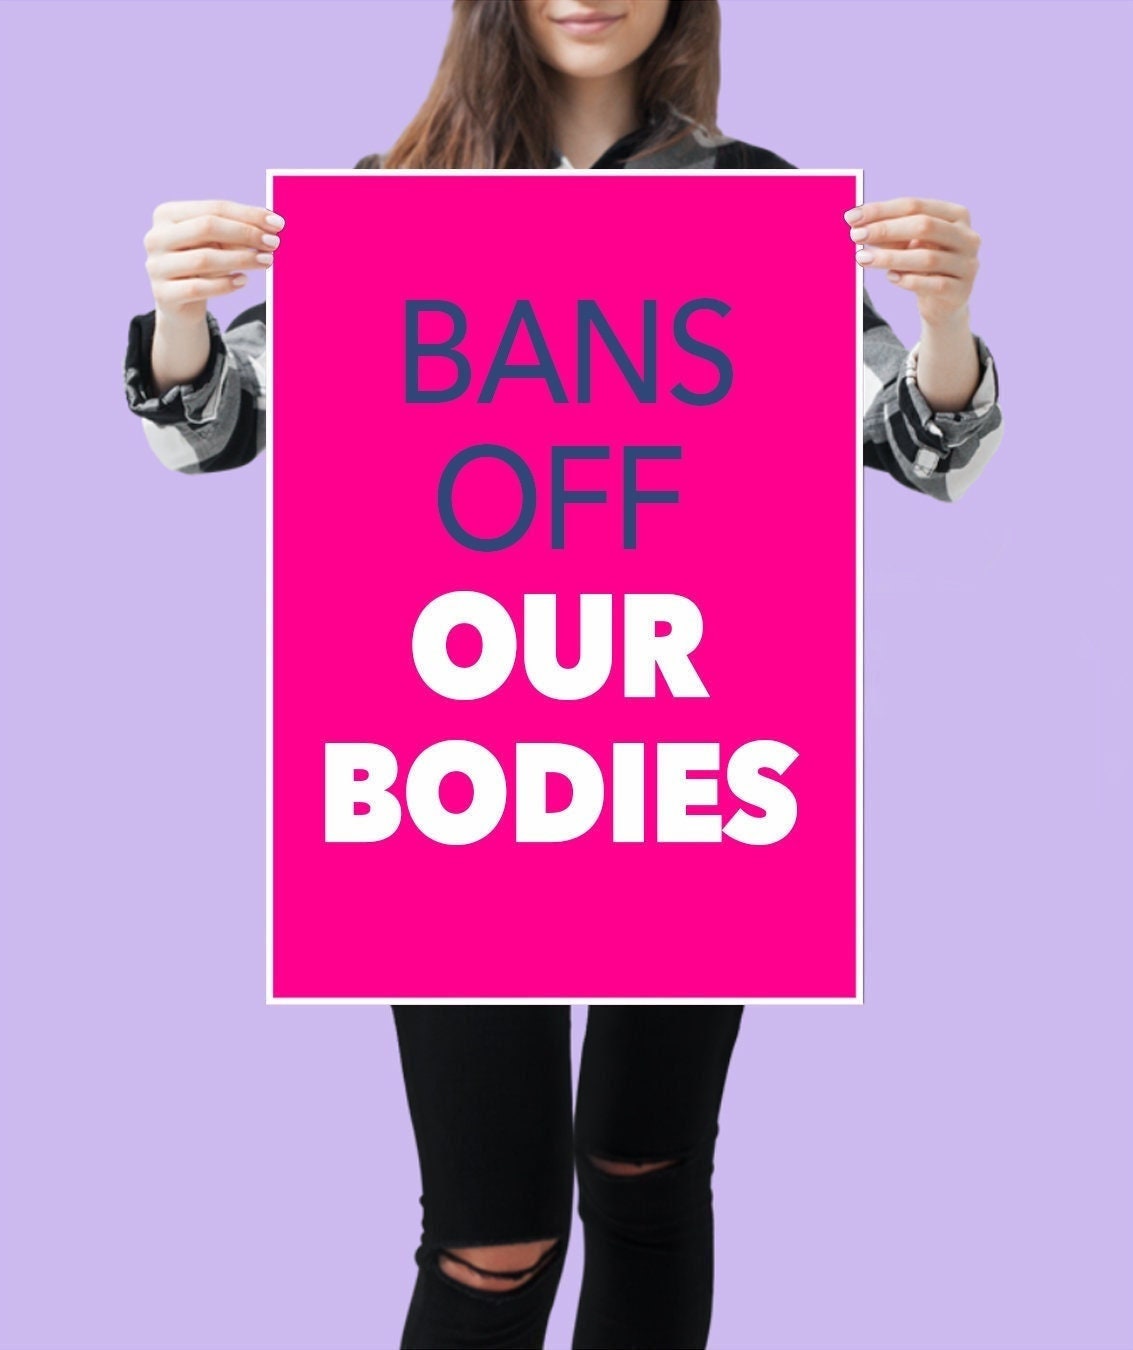 Reproductive Rights Poster, Bans off Our Bodies Poster, Abortion Rights Poster, Roe v wade poster, Pro choice poster